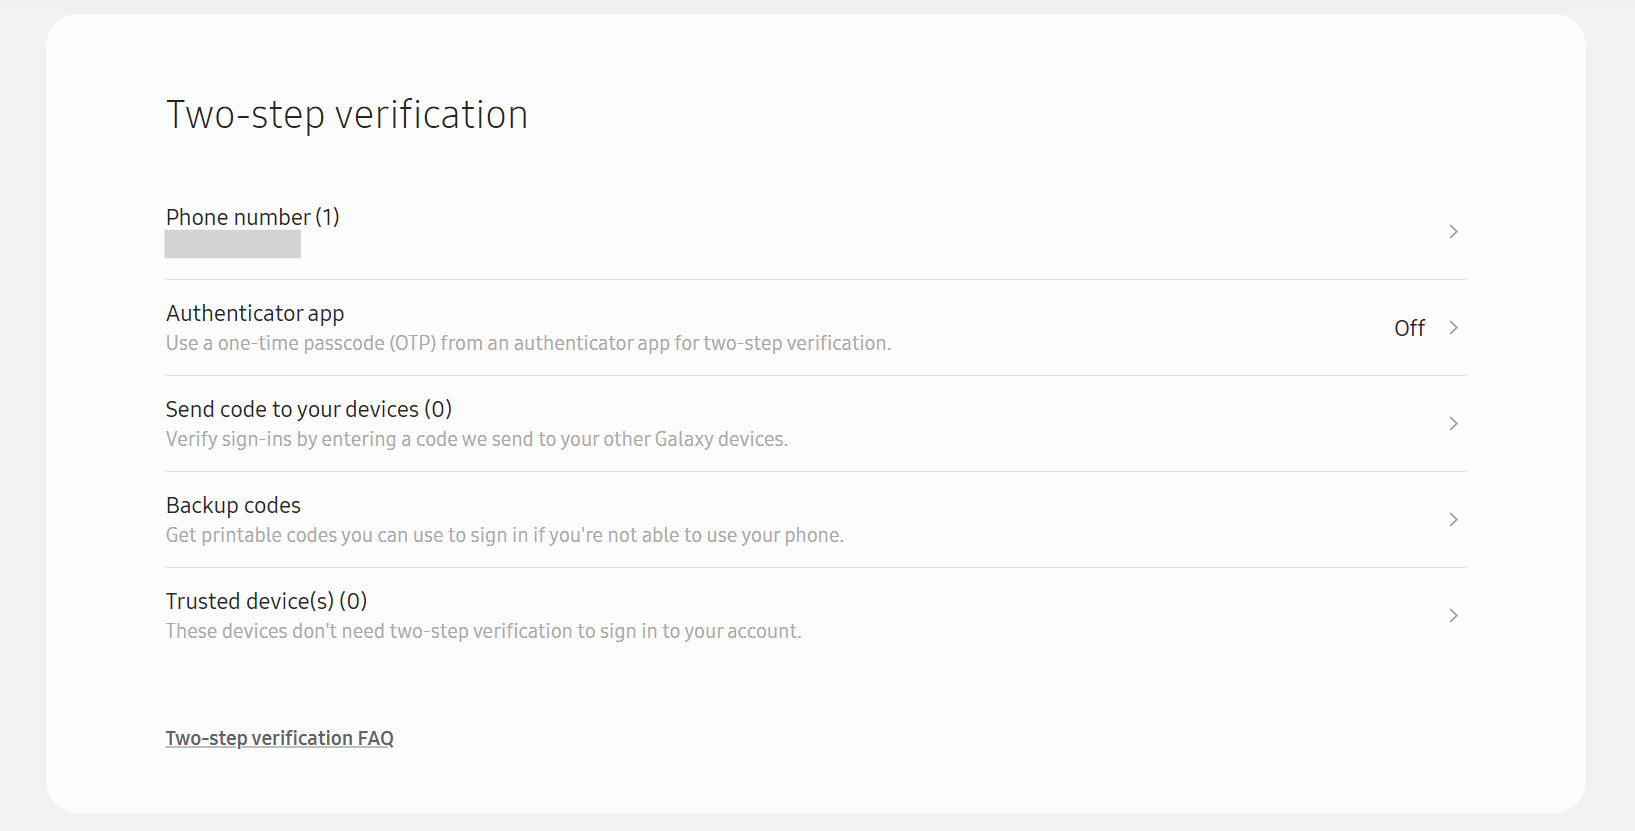 The Two-step verification page of your Samsung account.